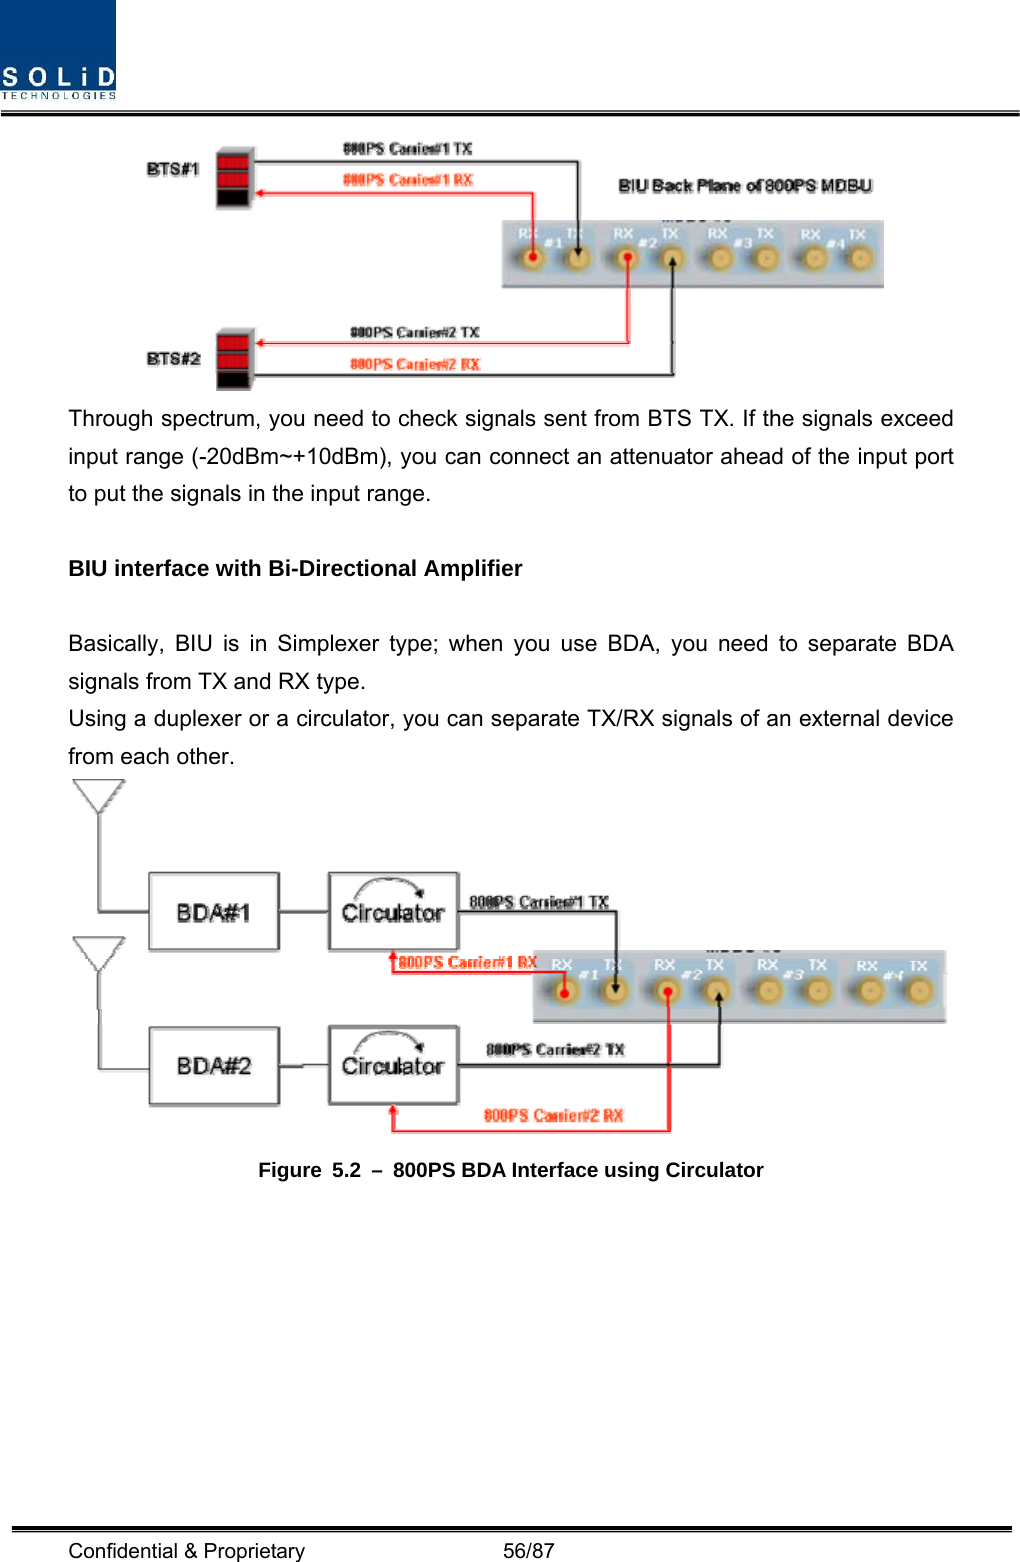  Confidential &amp; Proprietary                   56/87  Through spectrum, you need to check signals sent from BTS TX. If the signals exceed input range (-20dBm~+10dBm), you can connect an attenuator ahead of the input port to put the signals in the input range.  BIU interface with Bi-Directional Amplifier  Basically, BIU is in Simplexer type; when you use BDA, you need to separate BDA signals from TX and RX type. Using a duplexer or a circulator, you can separate TX/RX signals of an external device from each other.  Figure  5.2  –  800PS BDA Interface using Circulator 